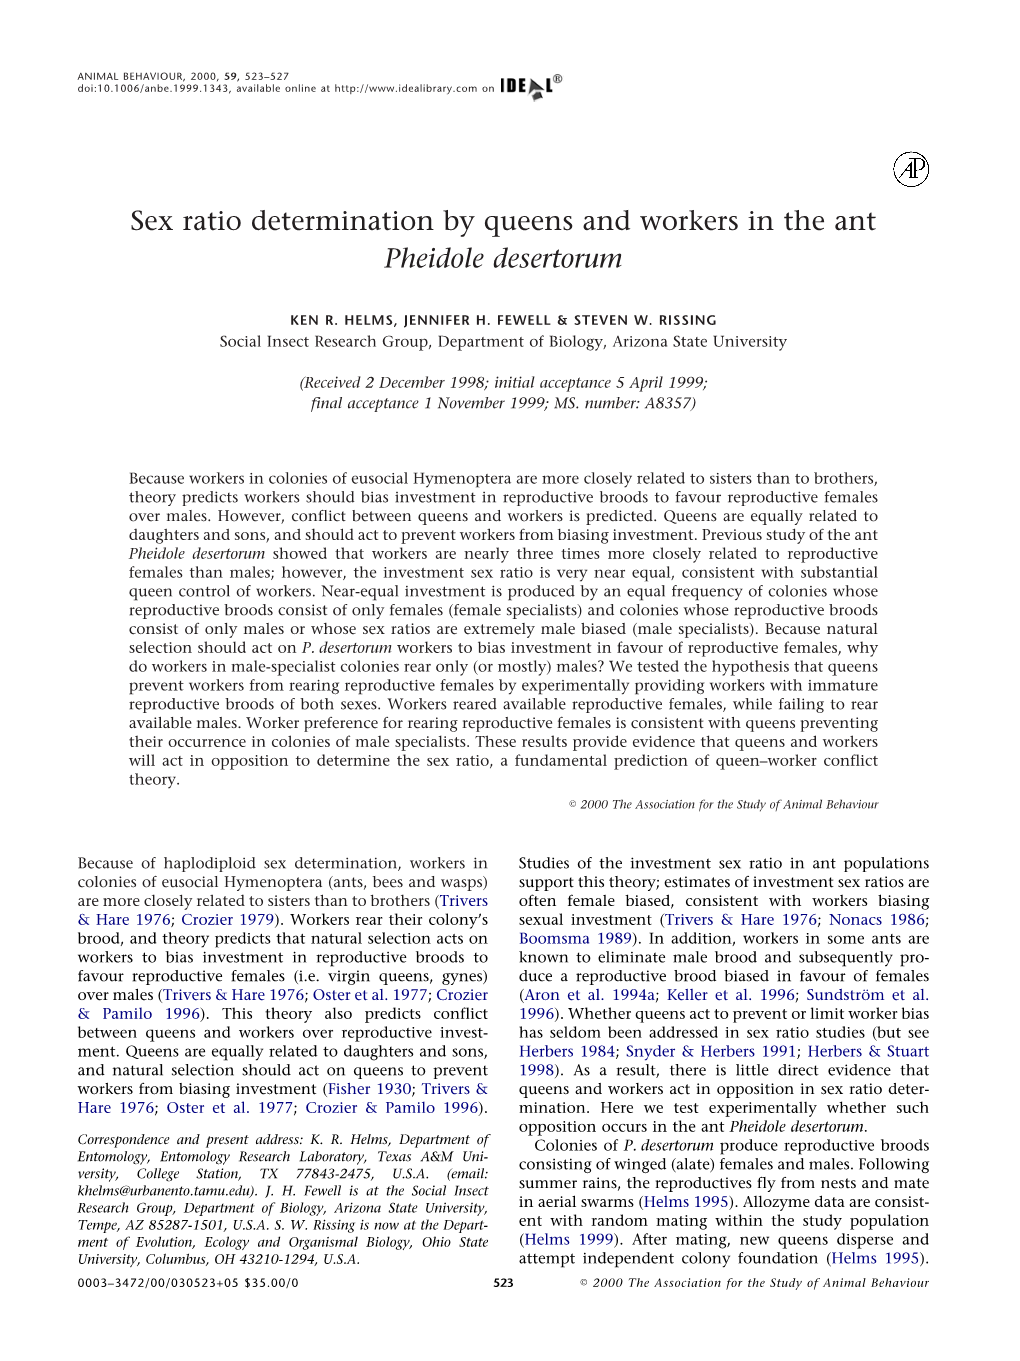 Sex Ratio Determination by Queens and Workers in the Ant Pheidole Desertorum